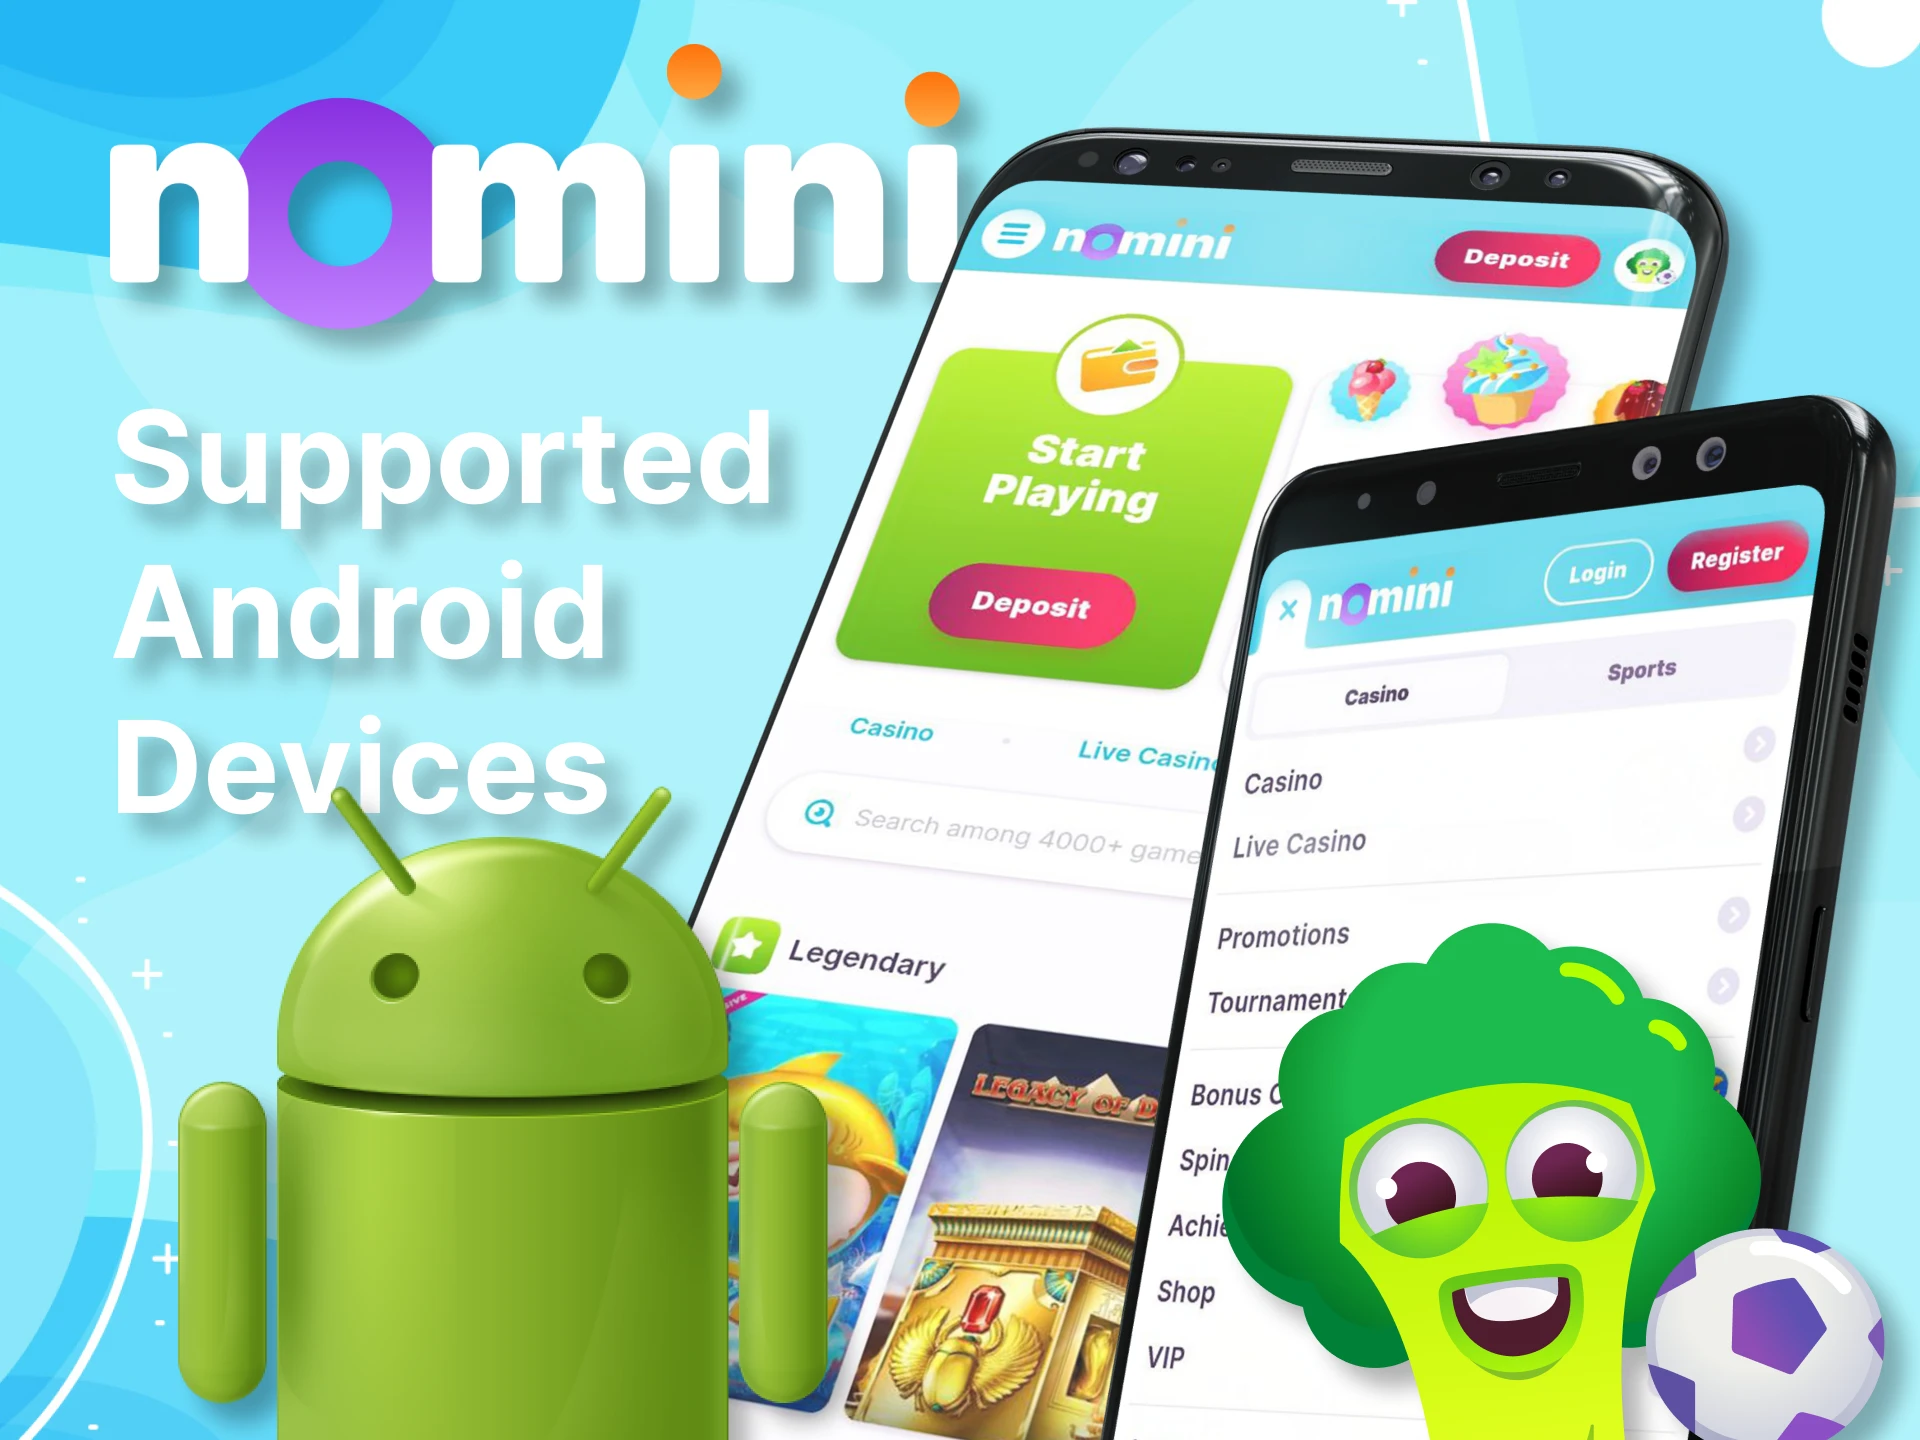 The Nomini app is supported on many Android devices.